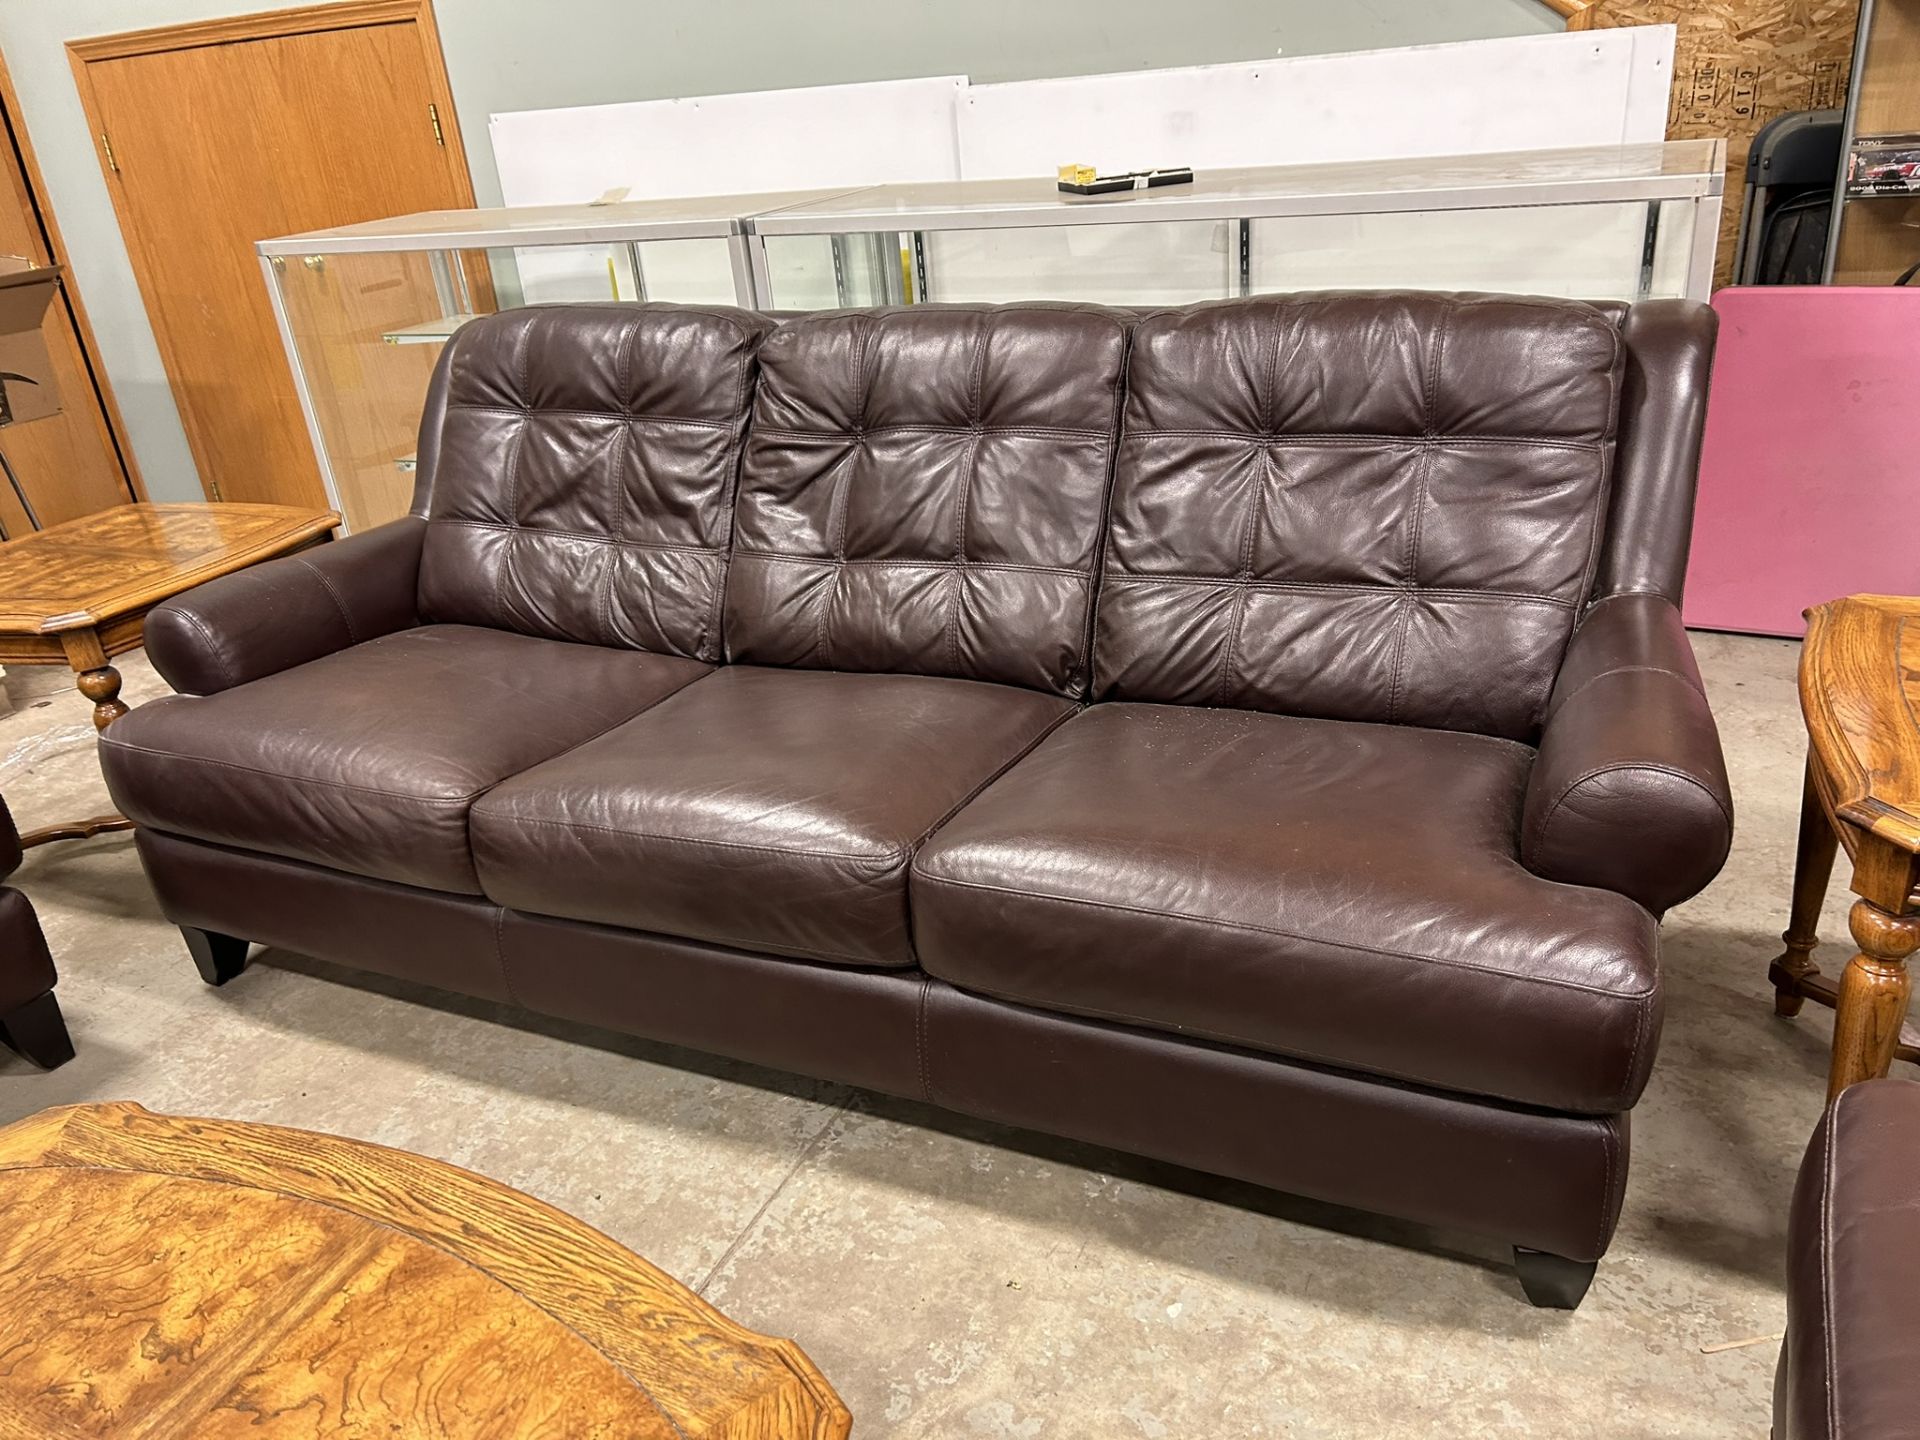 3 PC EXECUTIVE BROWN LEATHER SOFA, LOVESEAT & CHAIR (COFFEE & END TABLES NOT INCLUDED) - Image 5 of 8